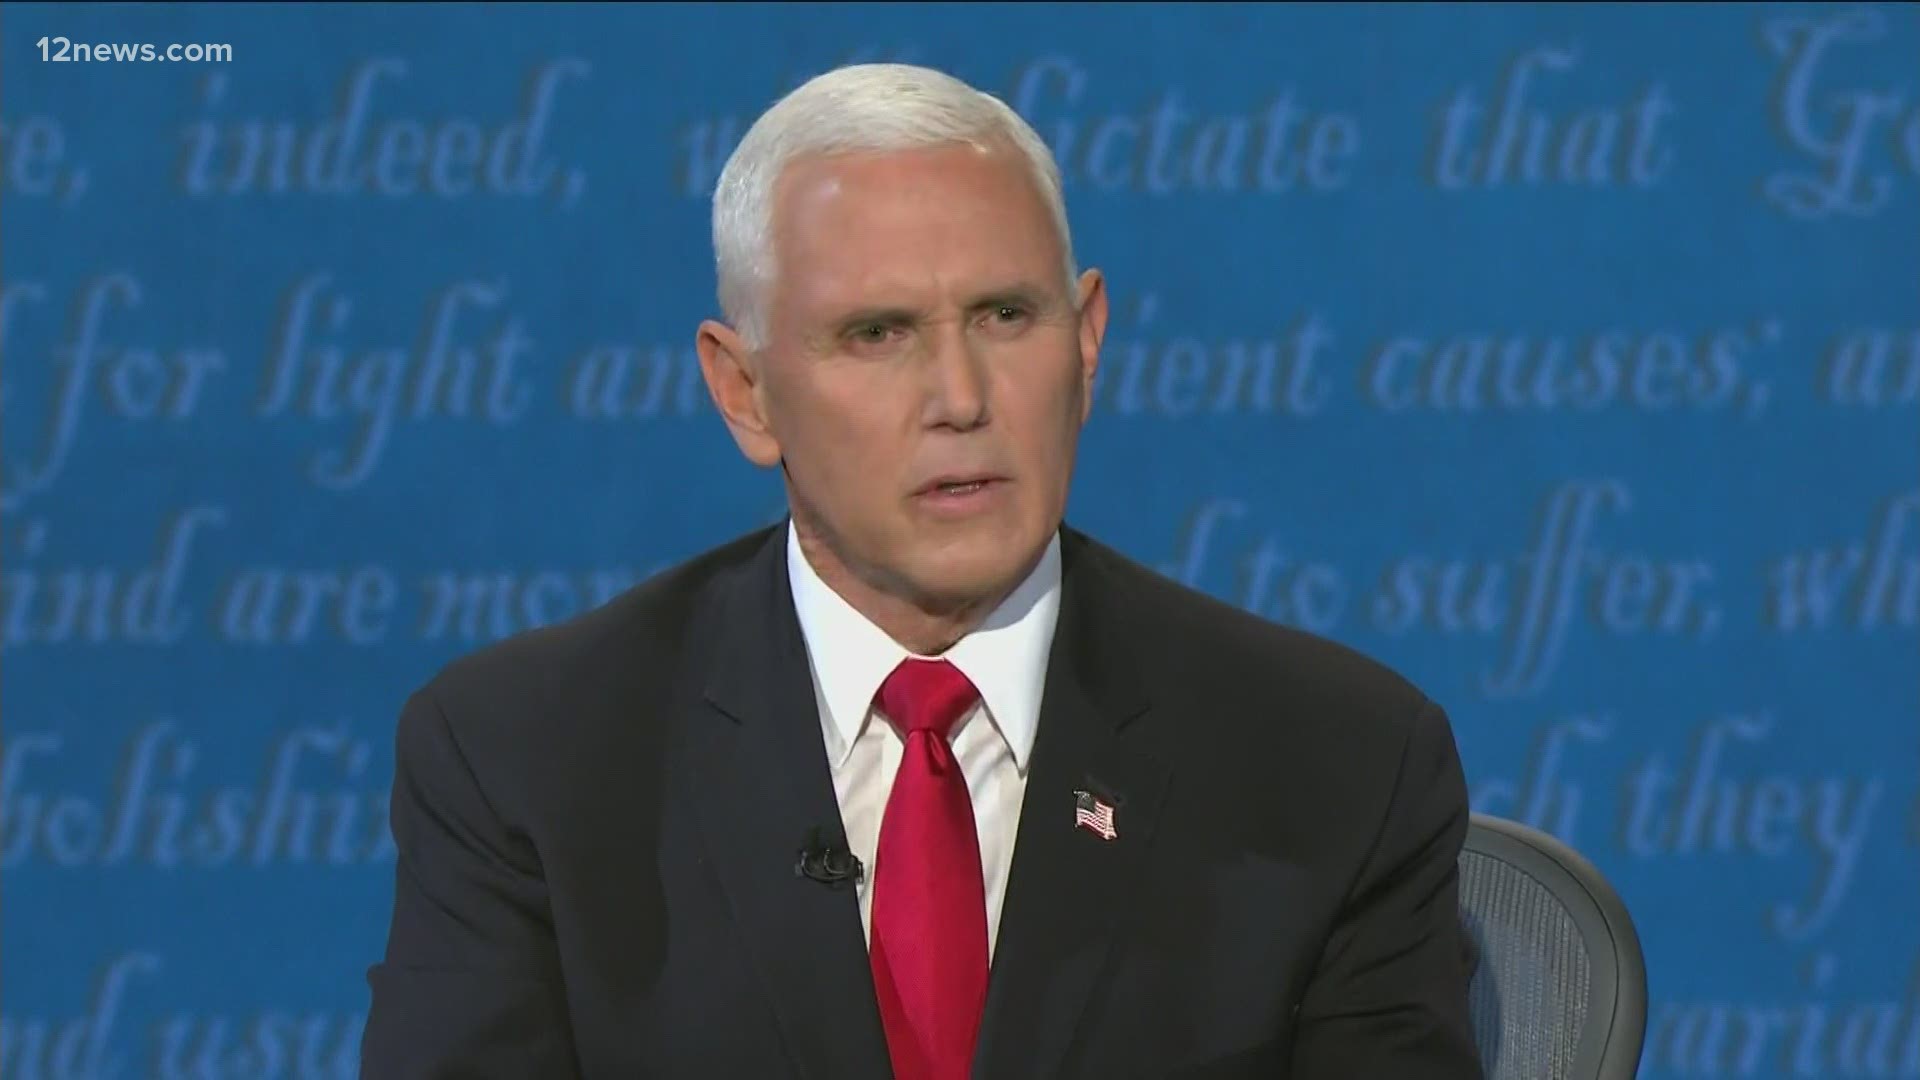 Vice President Mike Pence was joined in the debate hall by several special guests, including the parents of Kayla Mueller.